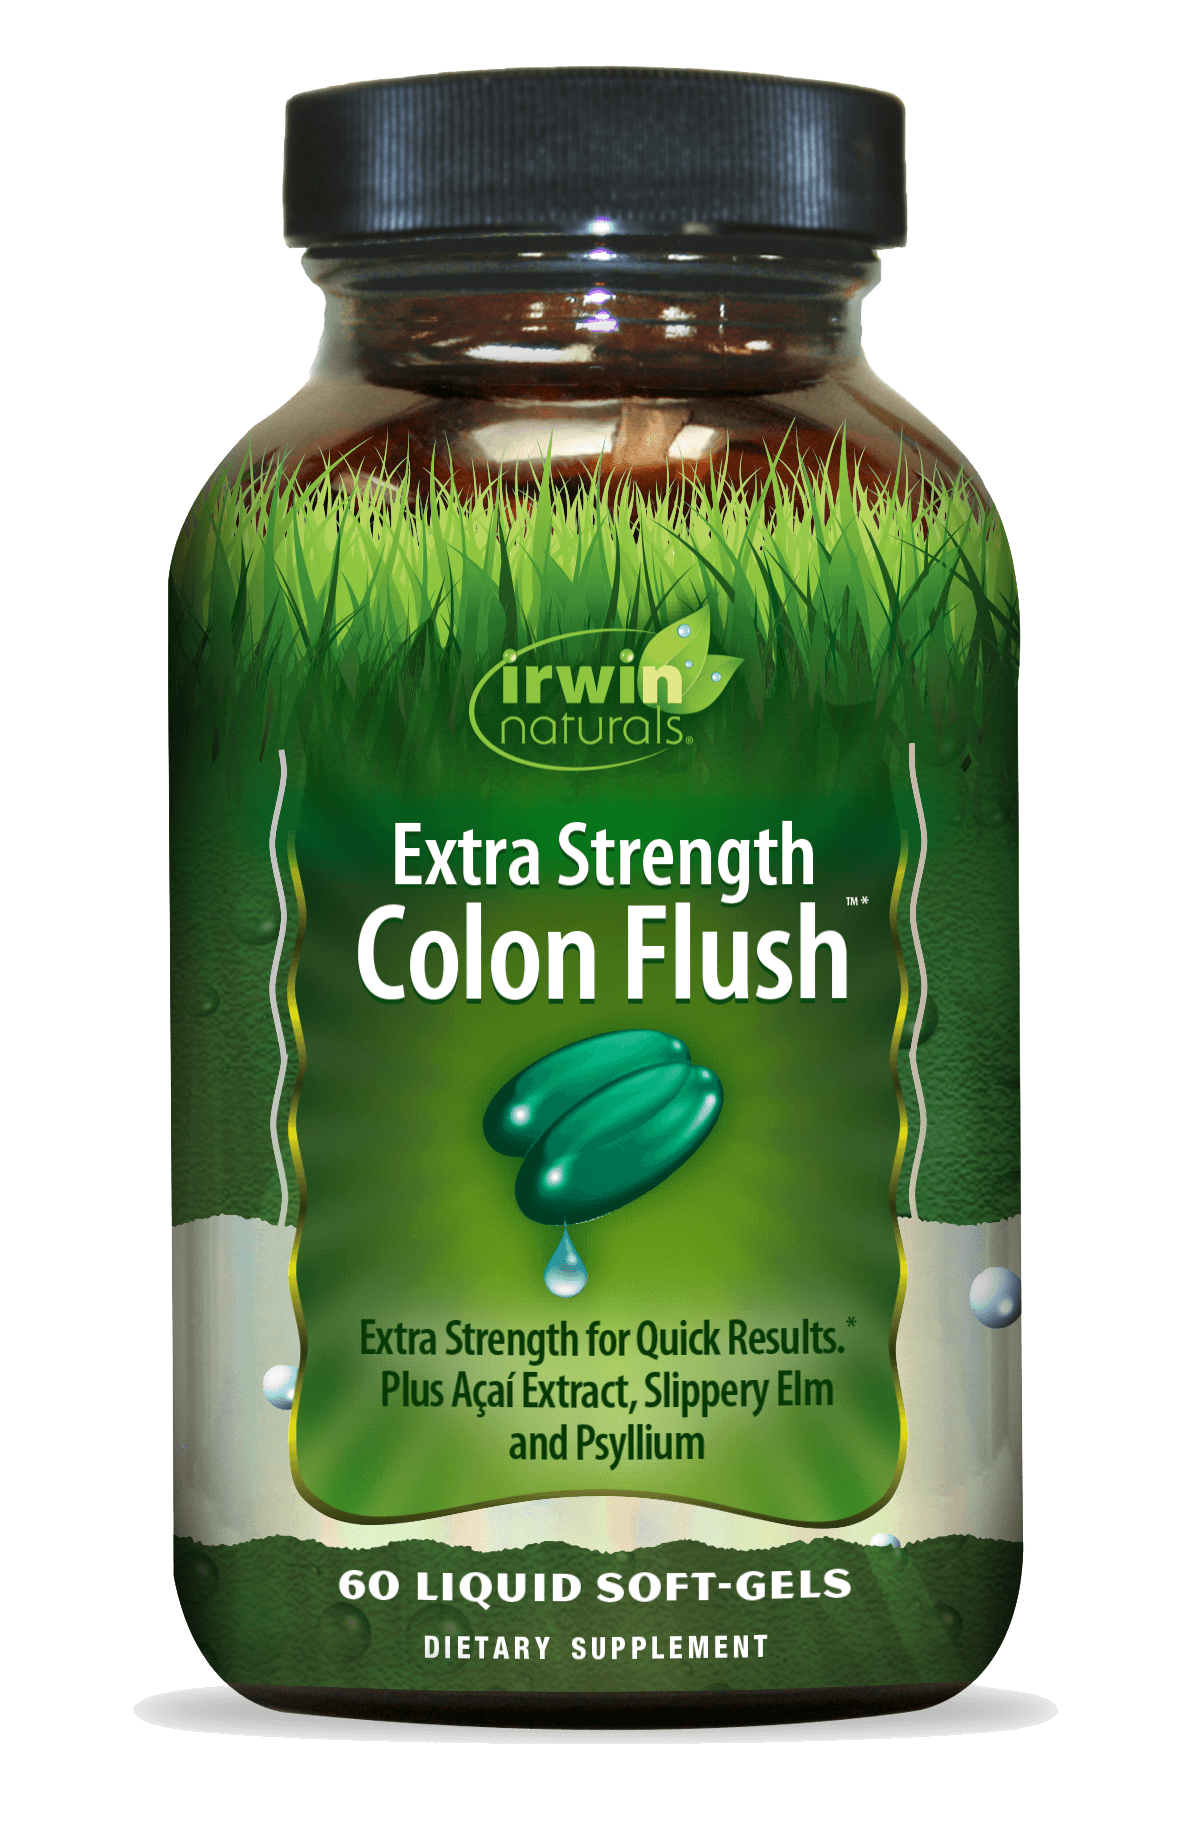 Extra Strength colon Flush by Irwin Naturals